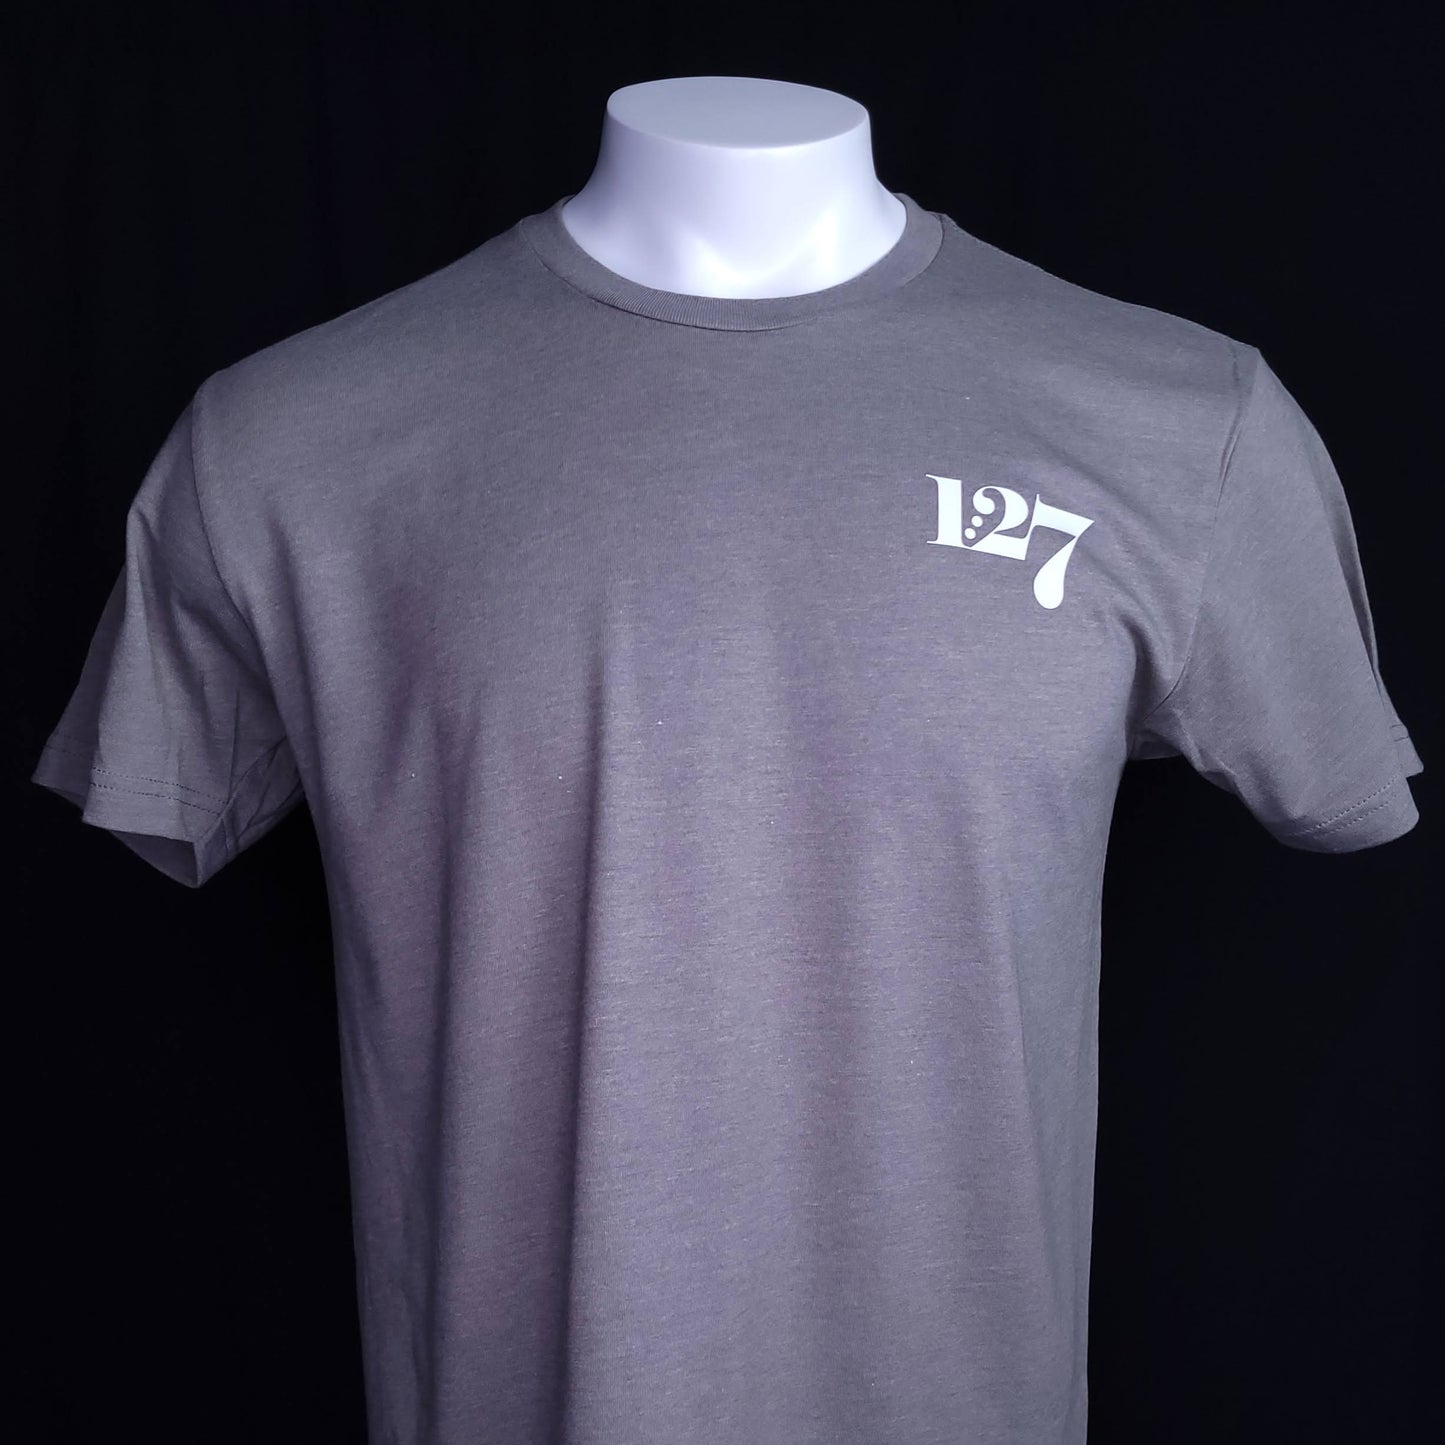 1:27 Signature . Left chest, Christian T-shirt, Made in the Image of God Shirt. 1:27 Clothing